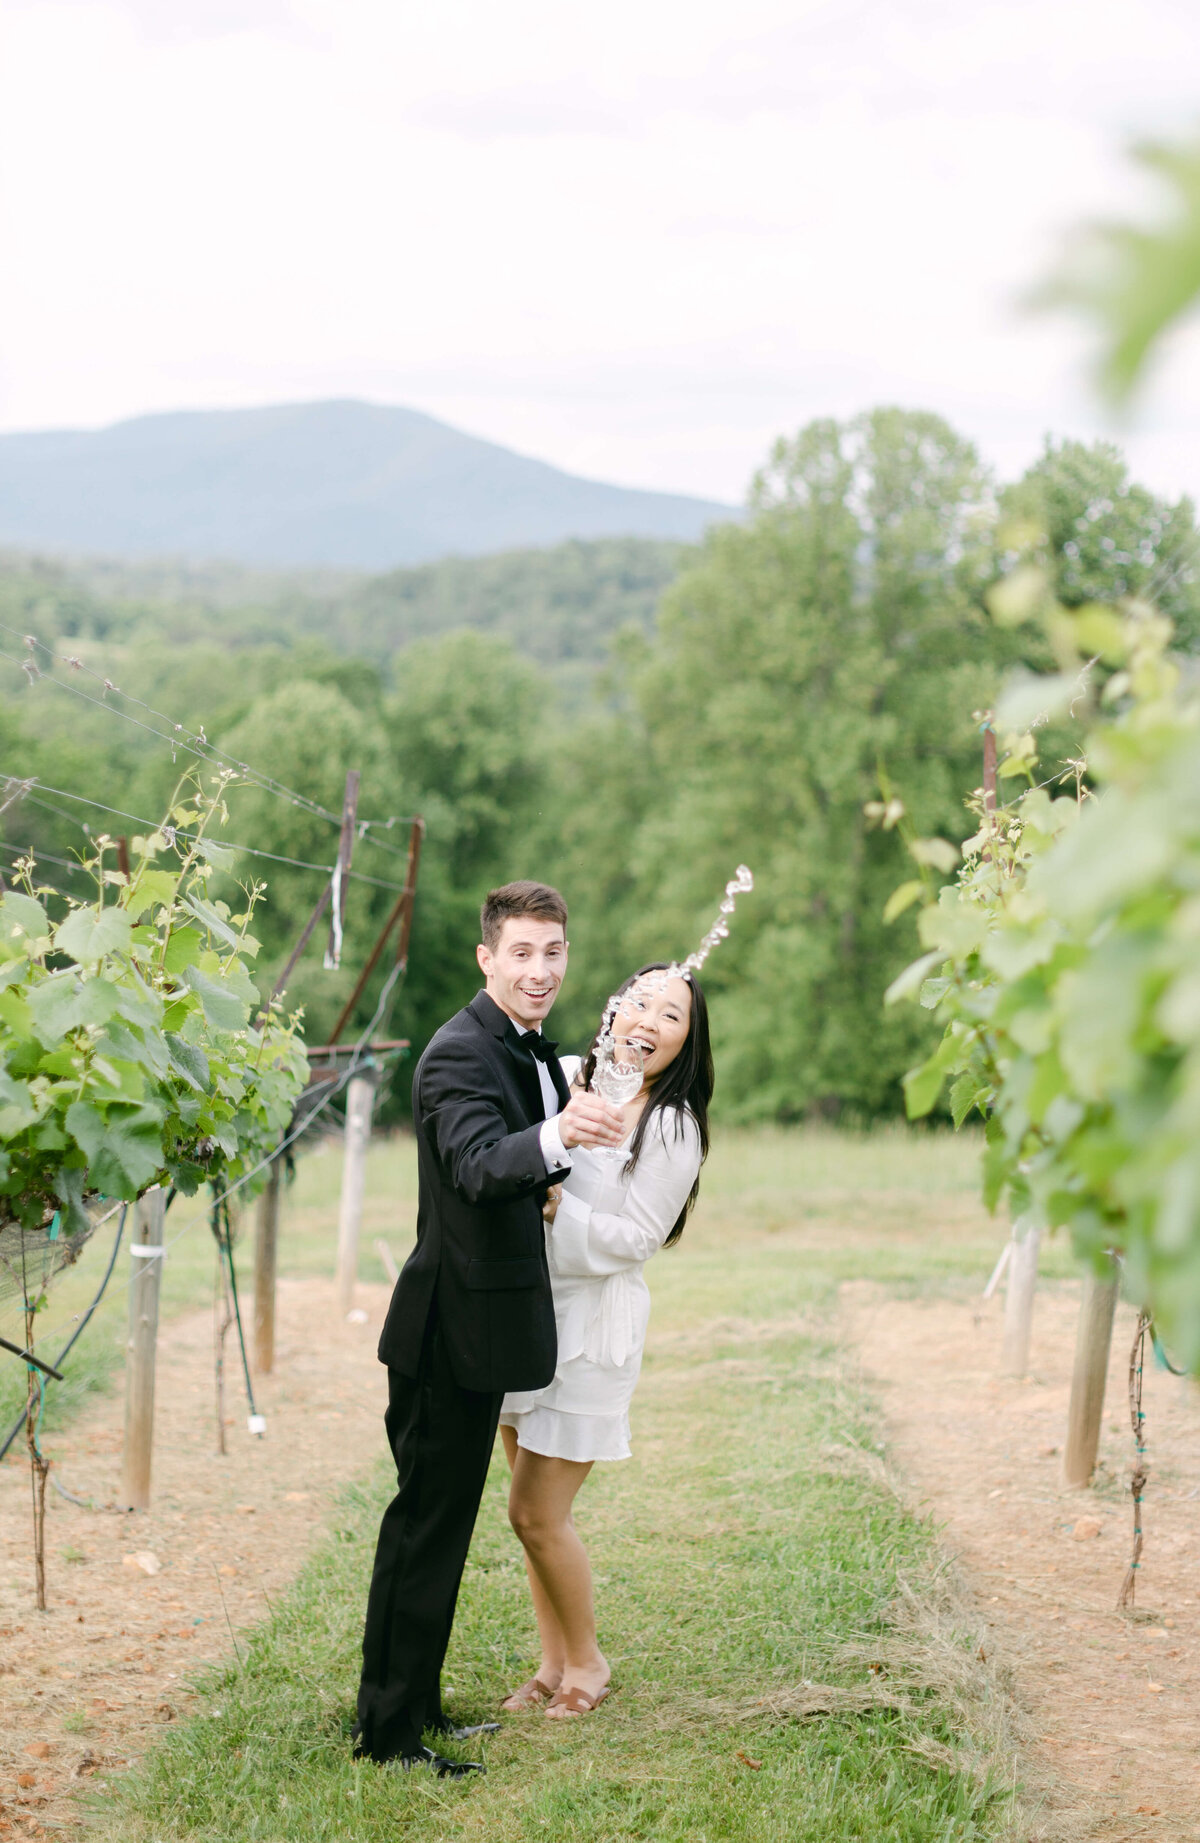 A bride and groom throw wine.